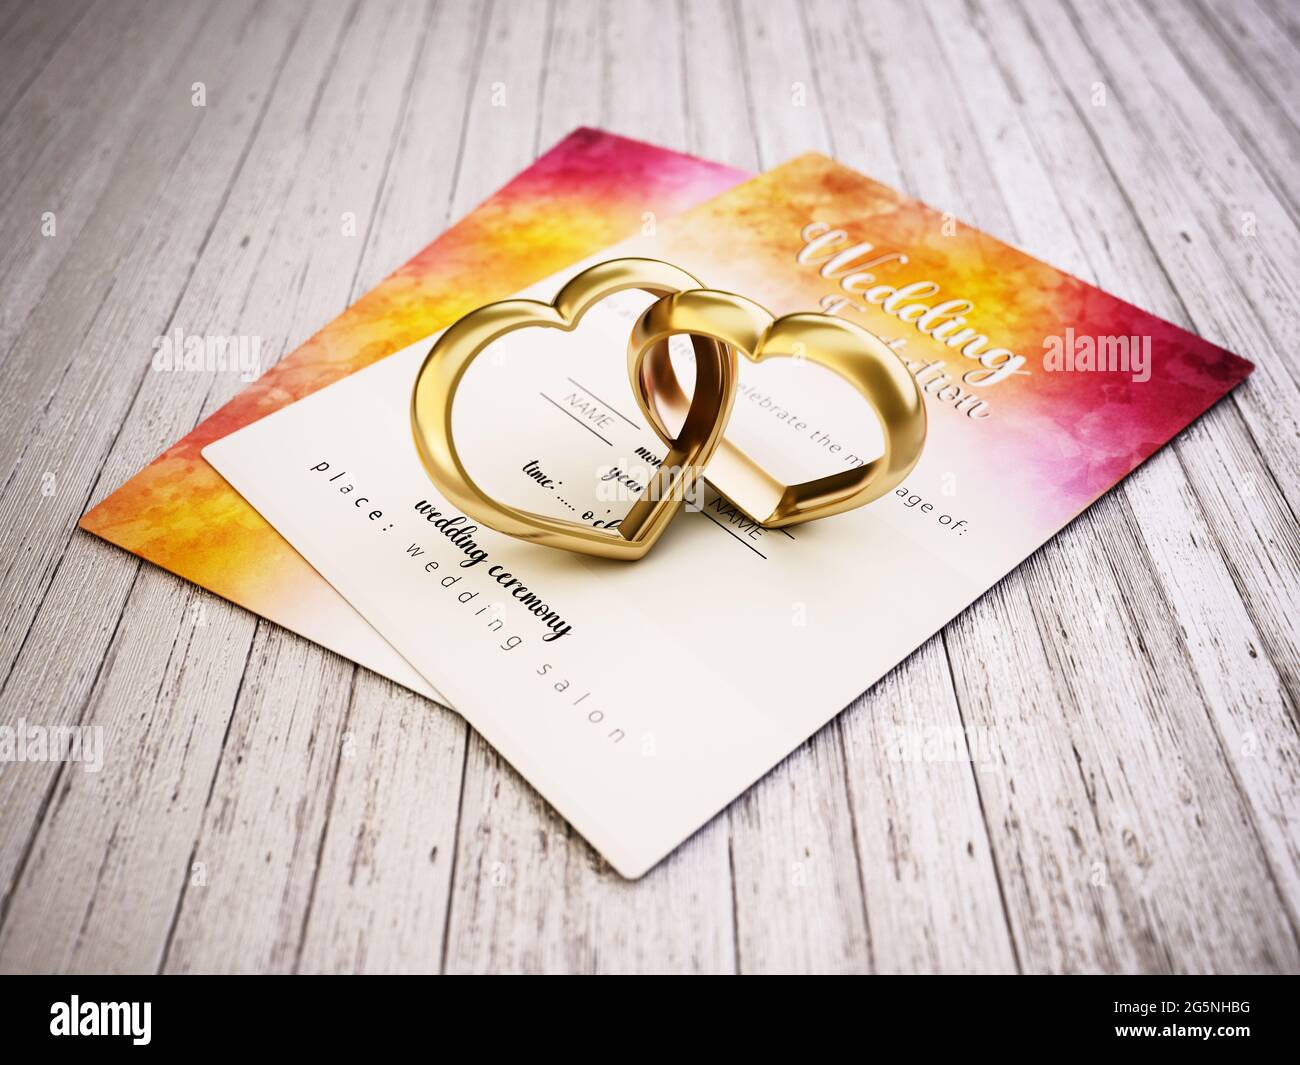 Two attached heart shaped rings standing on old wooden planks next to the wedding invitation. 3D illustration. Stock Photo